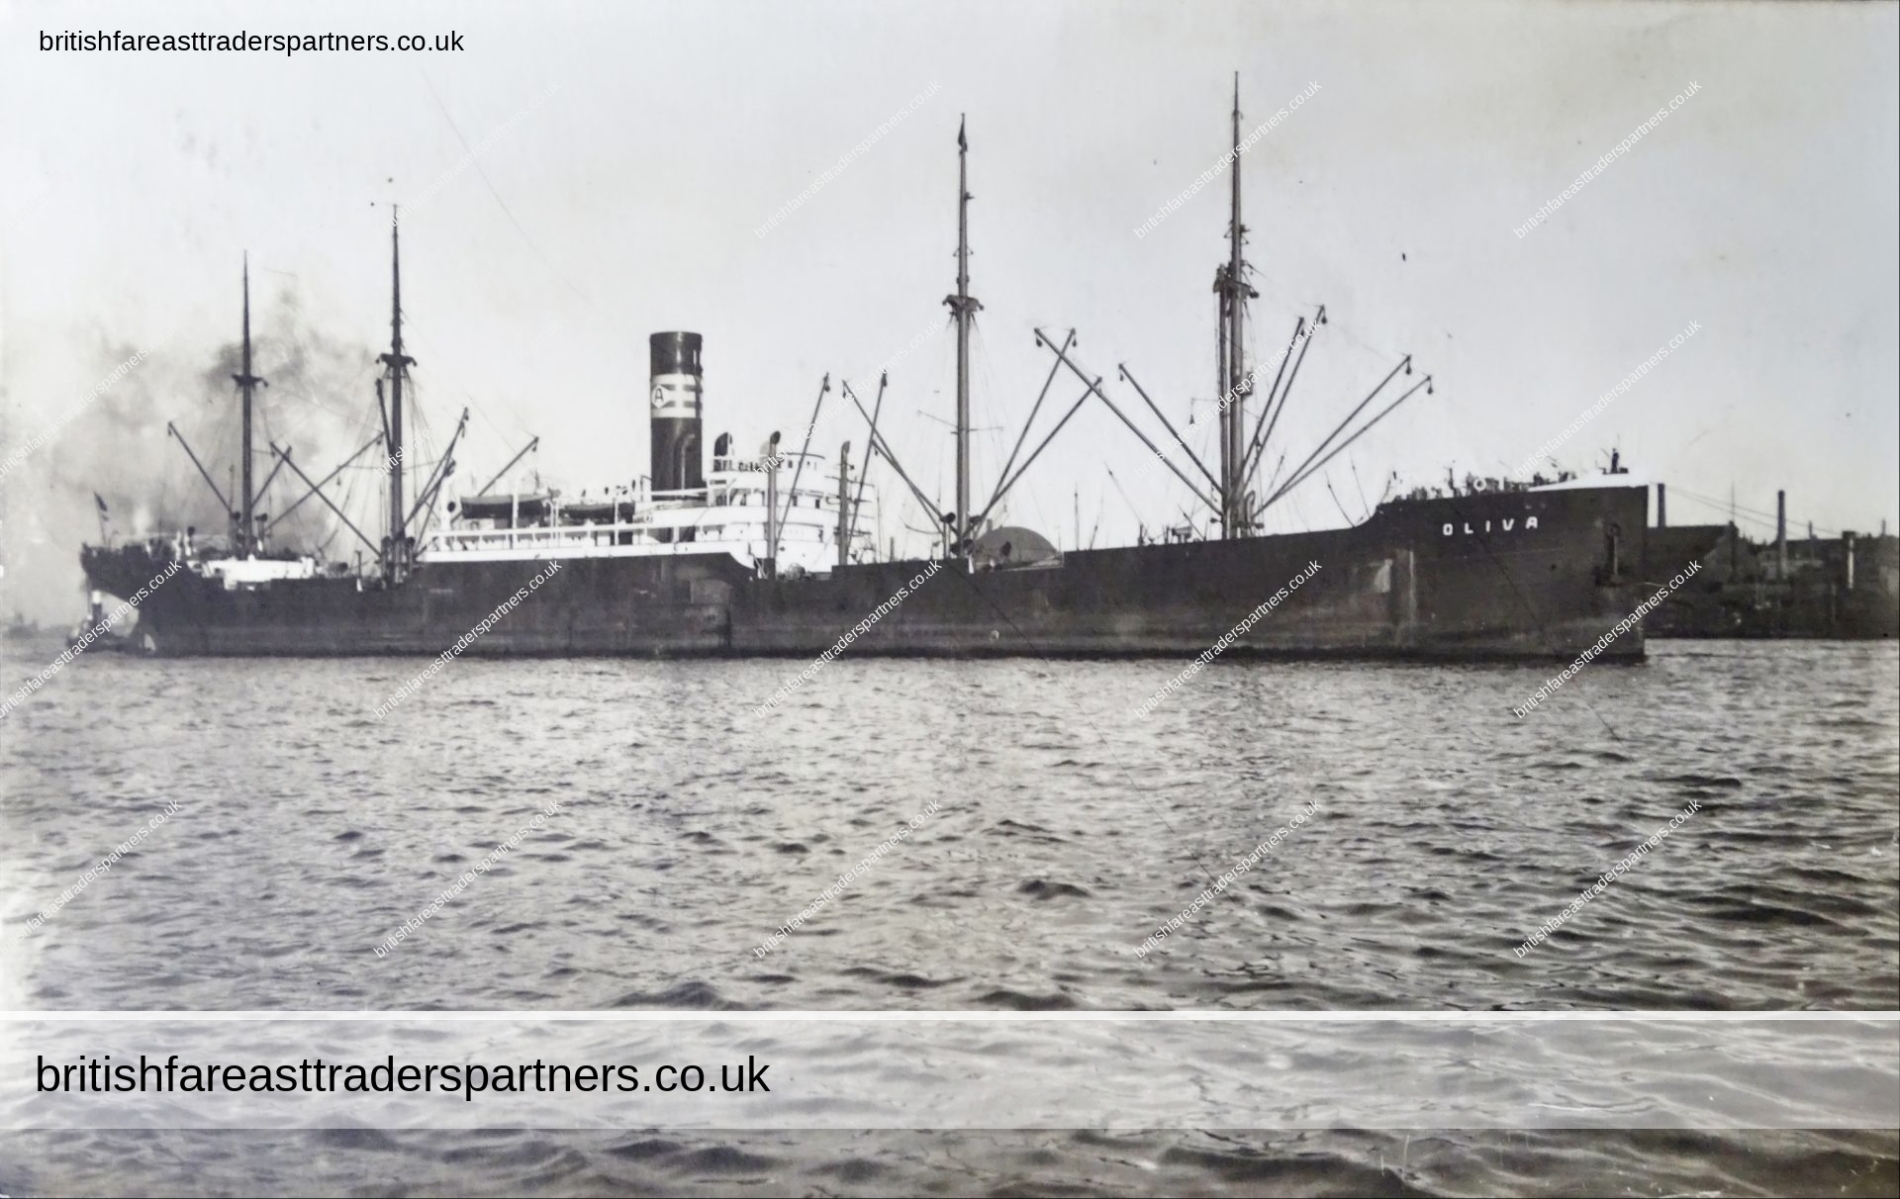 VINTAGE SS OLIVA POSTCARD STEAM SHIP / MERCHANT CARGO SHIP BUILT IN 1921 BY BREMER VULKAN OWNED BY STINNES HUGO AT THE TIME OF HER LOSS 1941 Collectables > Transportation Collectables > Nautical > Merchant Navy VINTAGE | MARITIME | HERITAGE | HISTORY